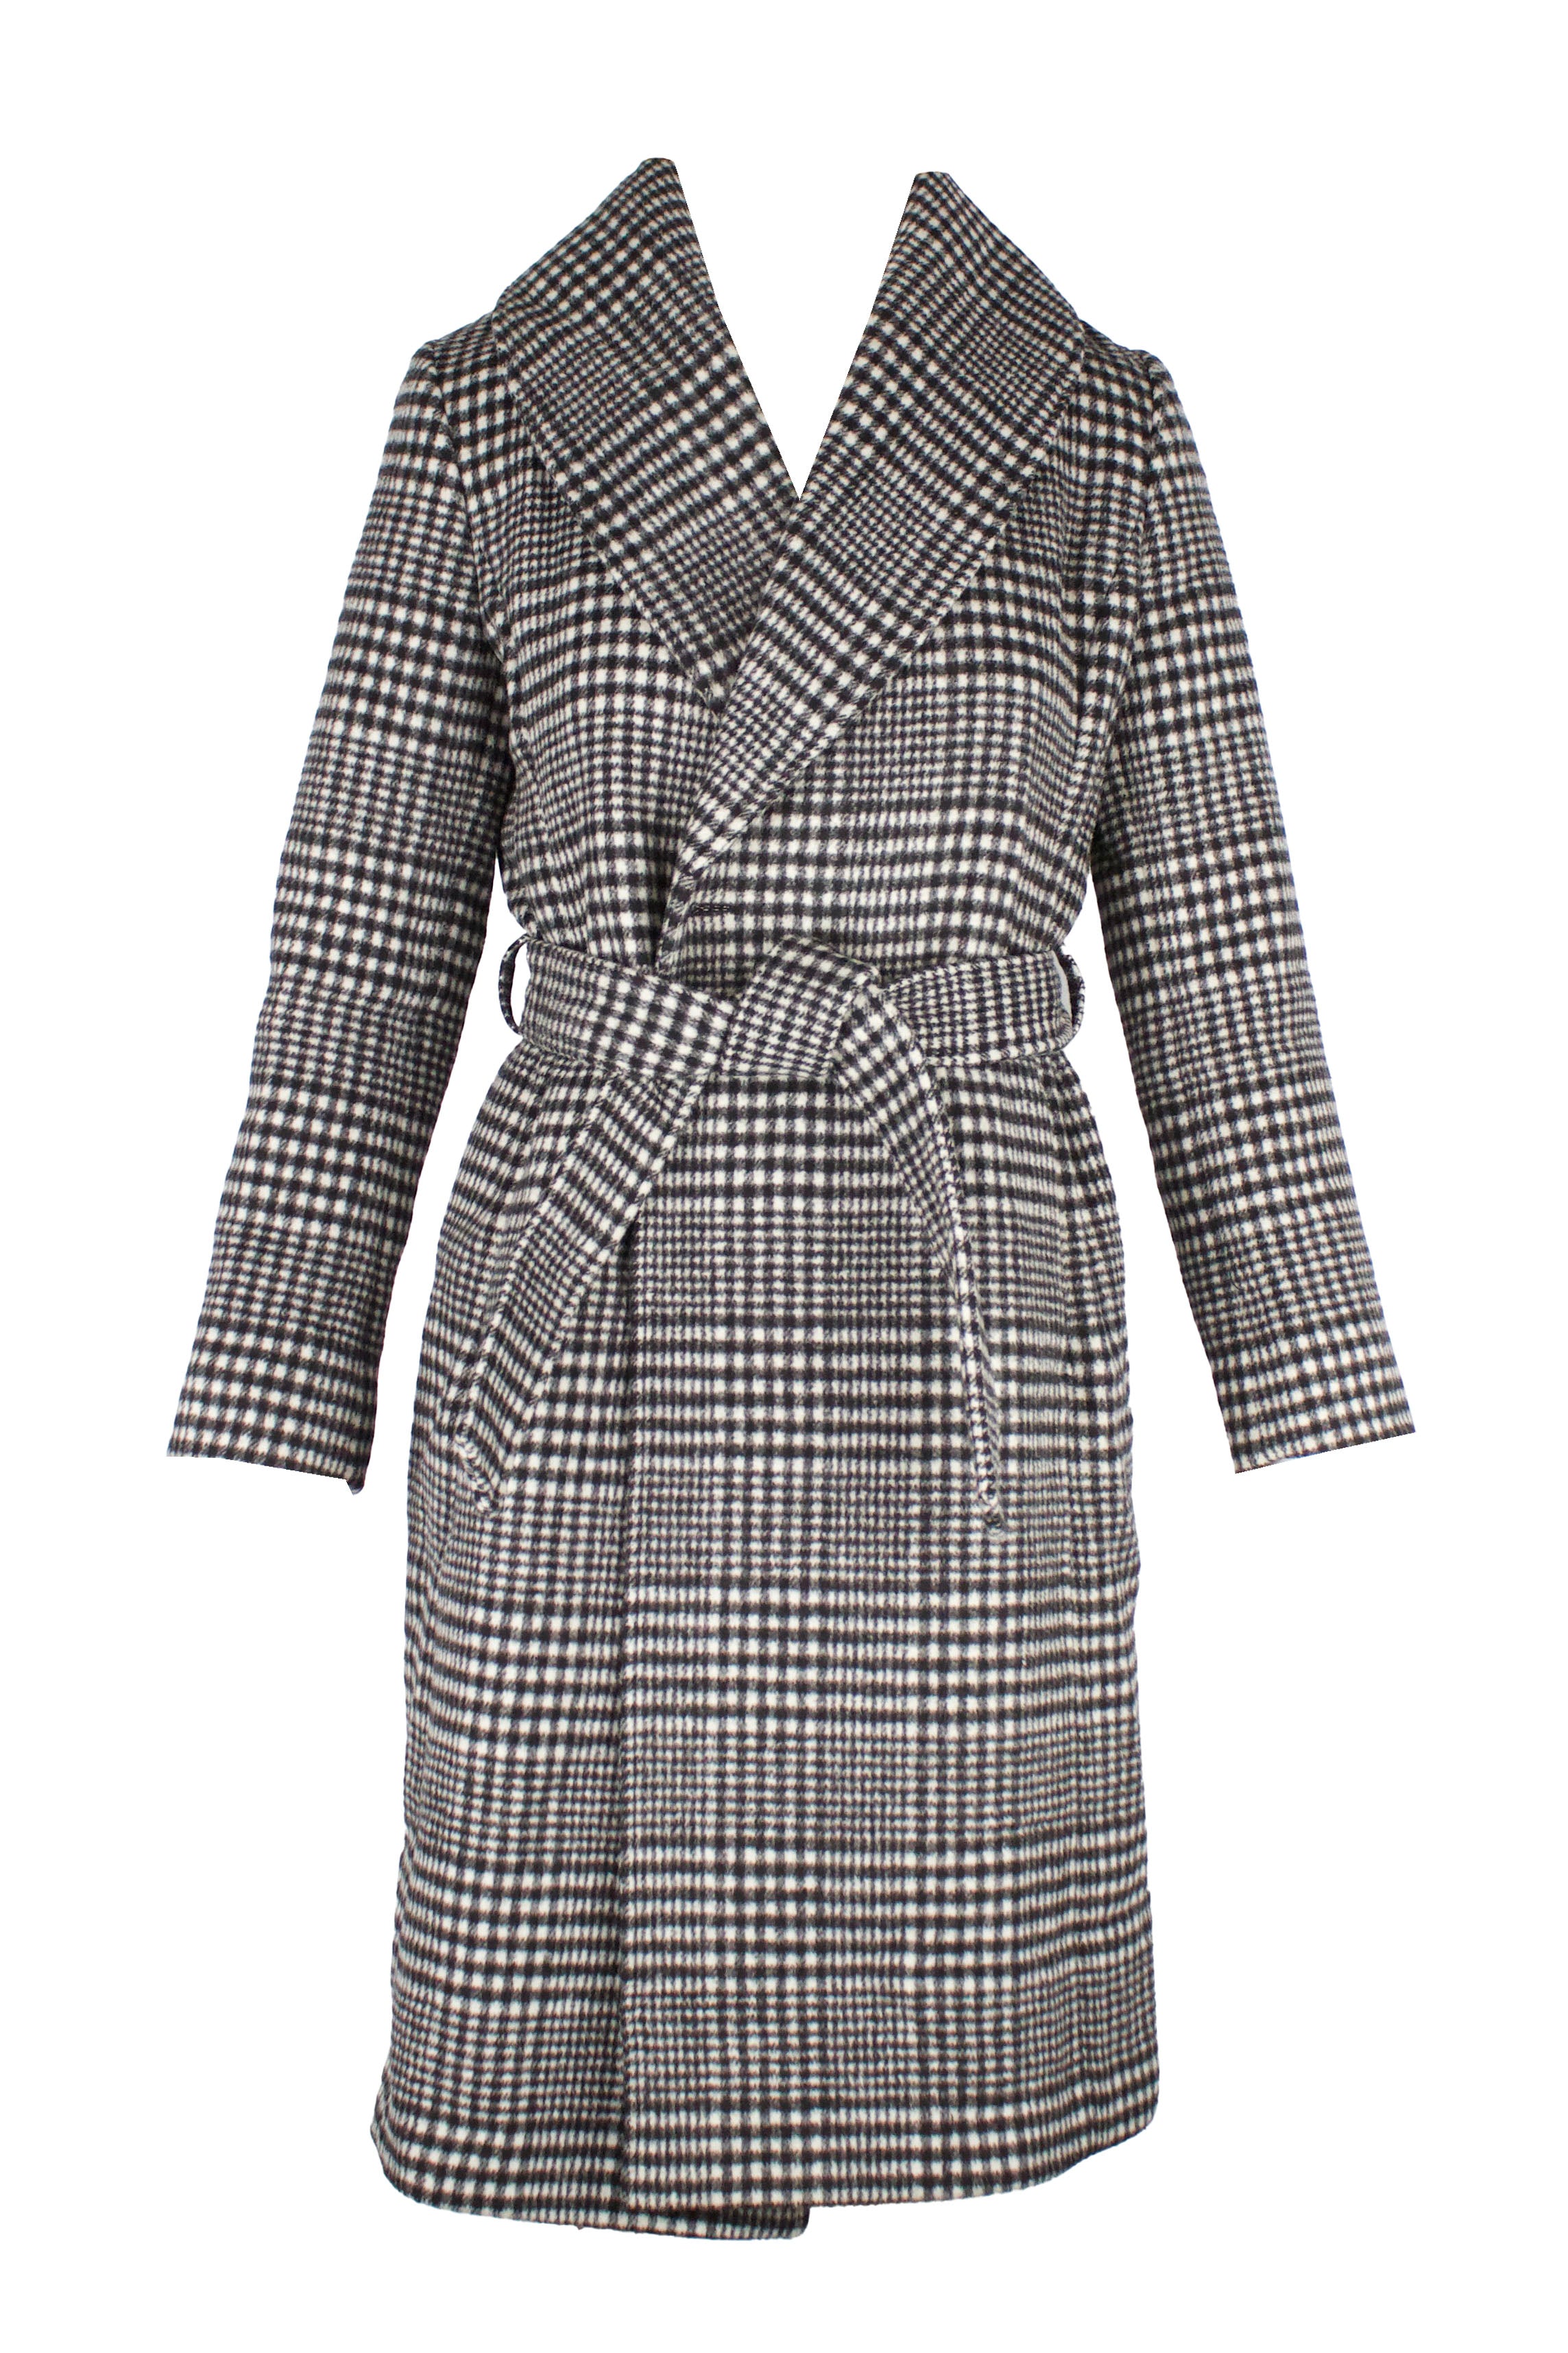 front of 346 brooks brothers black and white coat. features plaid pattern throughout, notched lapels, v-neckline, side seam pockets, and self tie belt at waist.